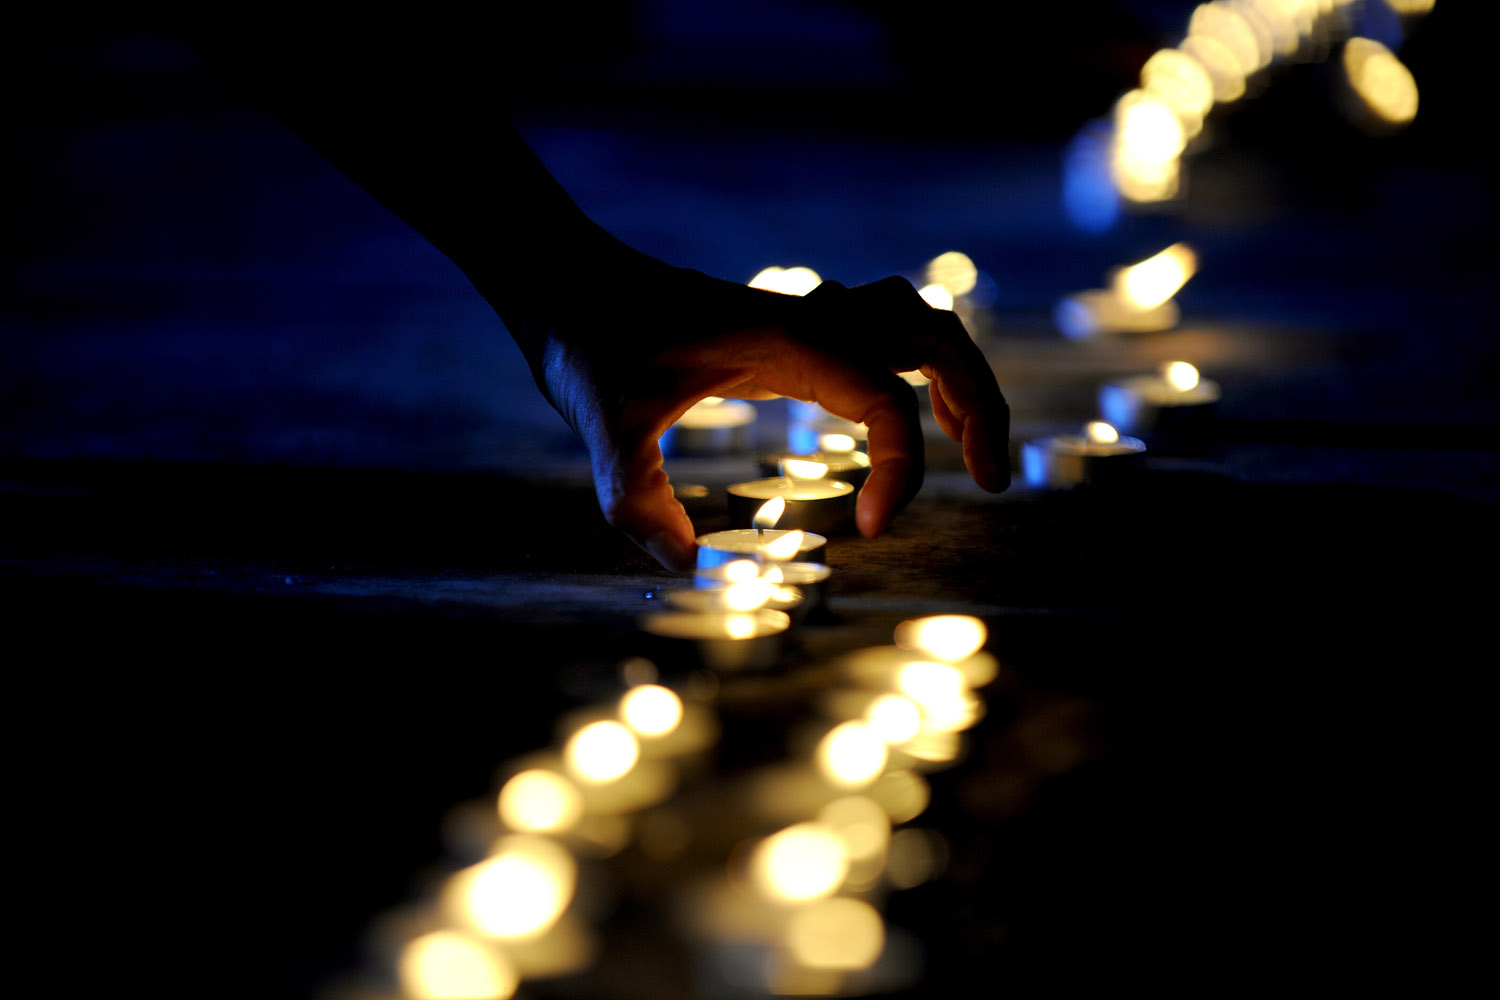 Aug. 19, 2012. A college student lights candles during a ceremony to mark the 1,000th day since a 2009 massacre that left 57 people, including journalists, dead, in Manila.